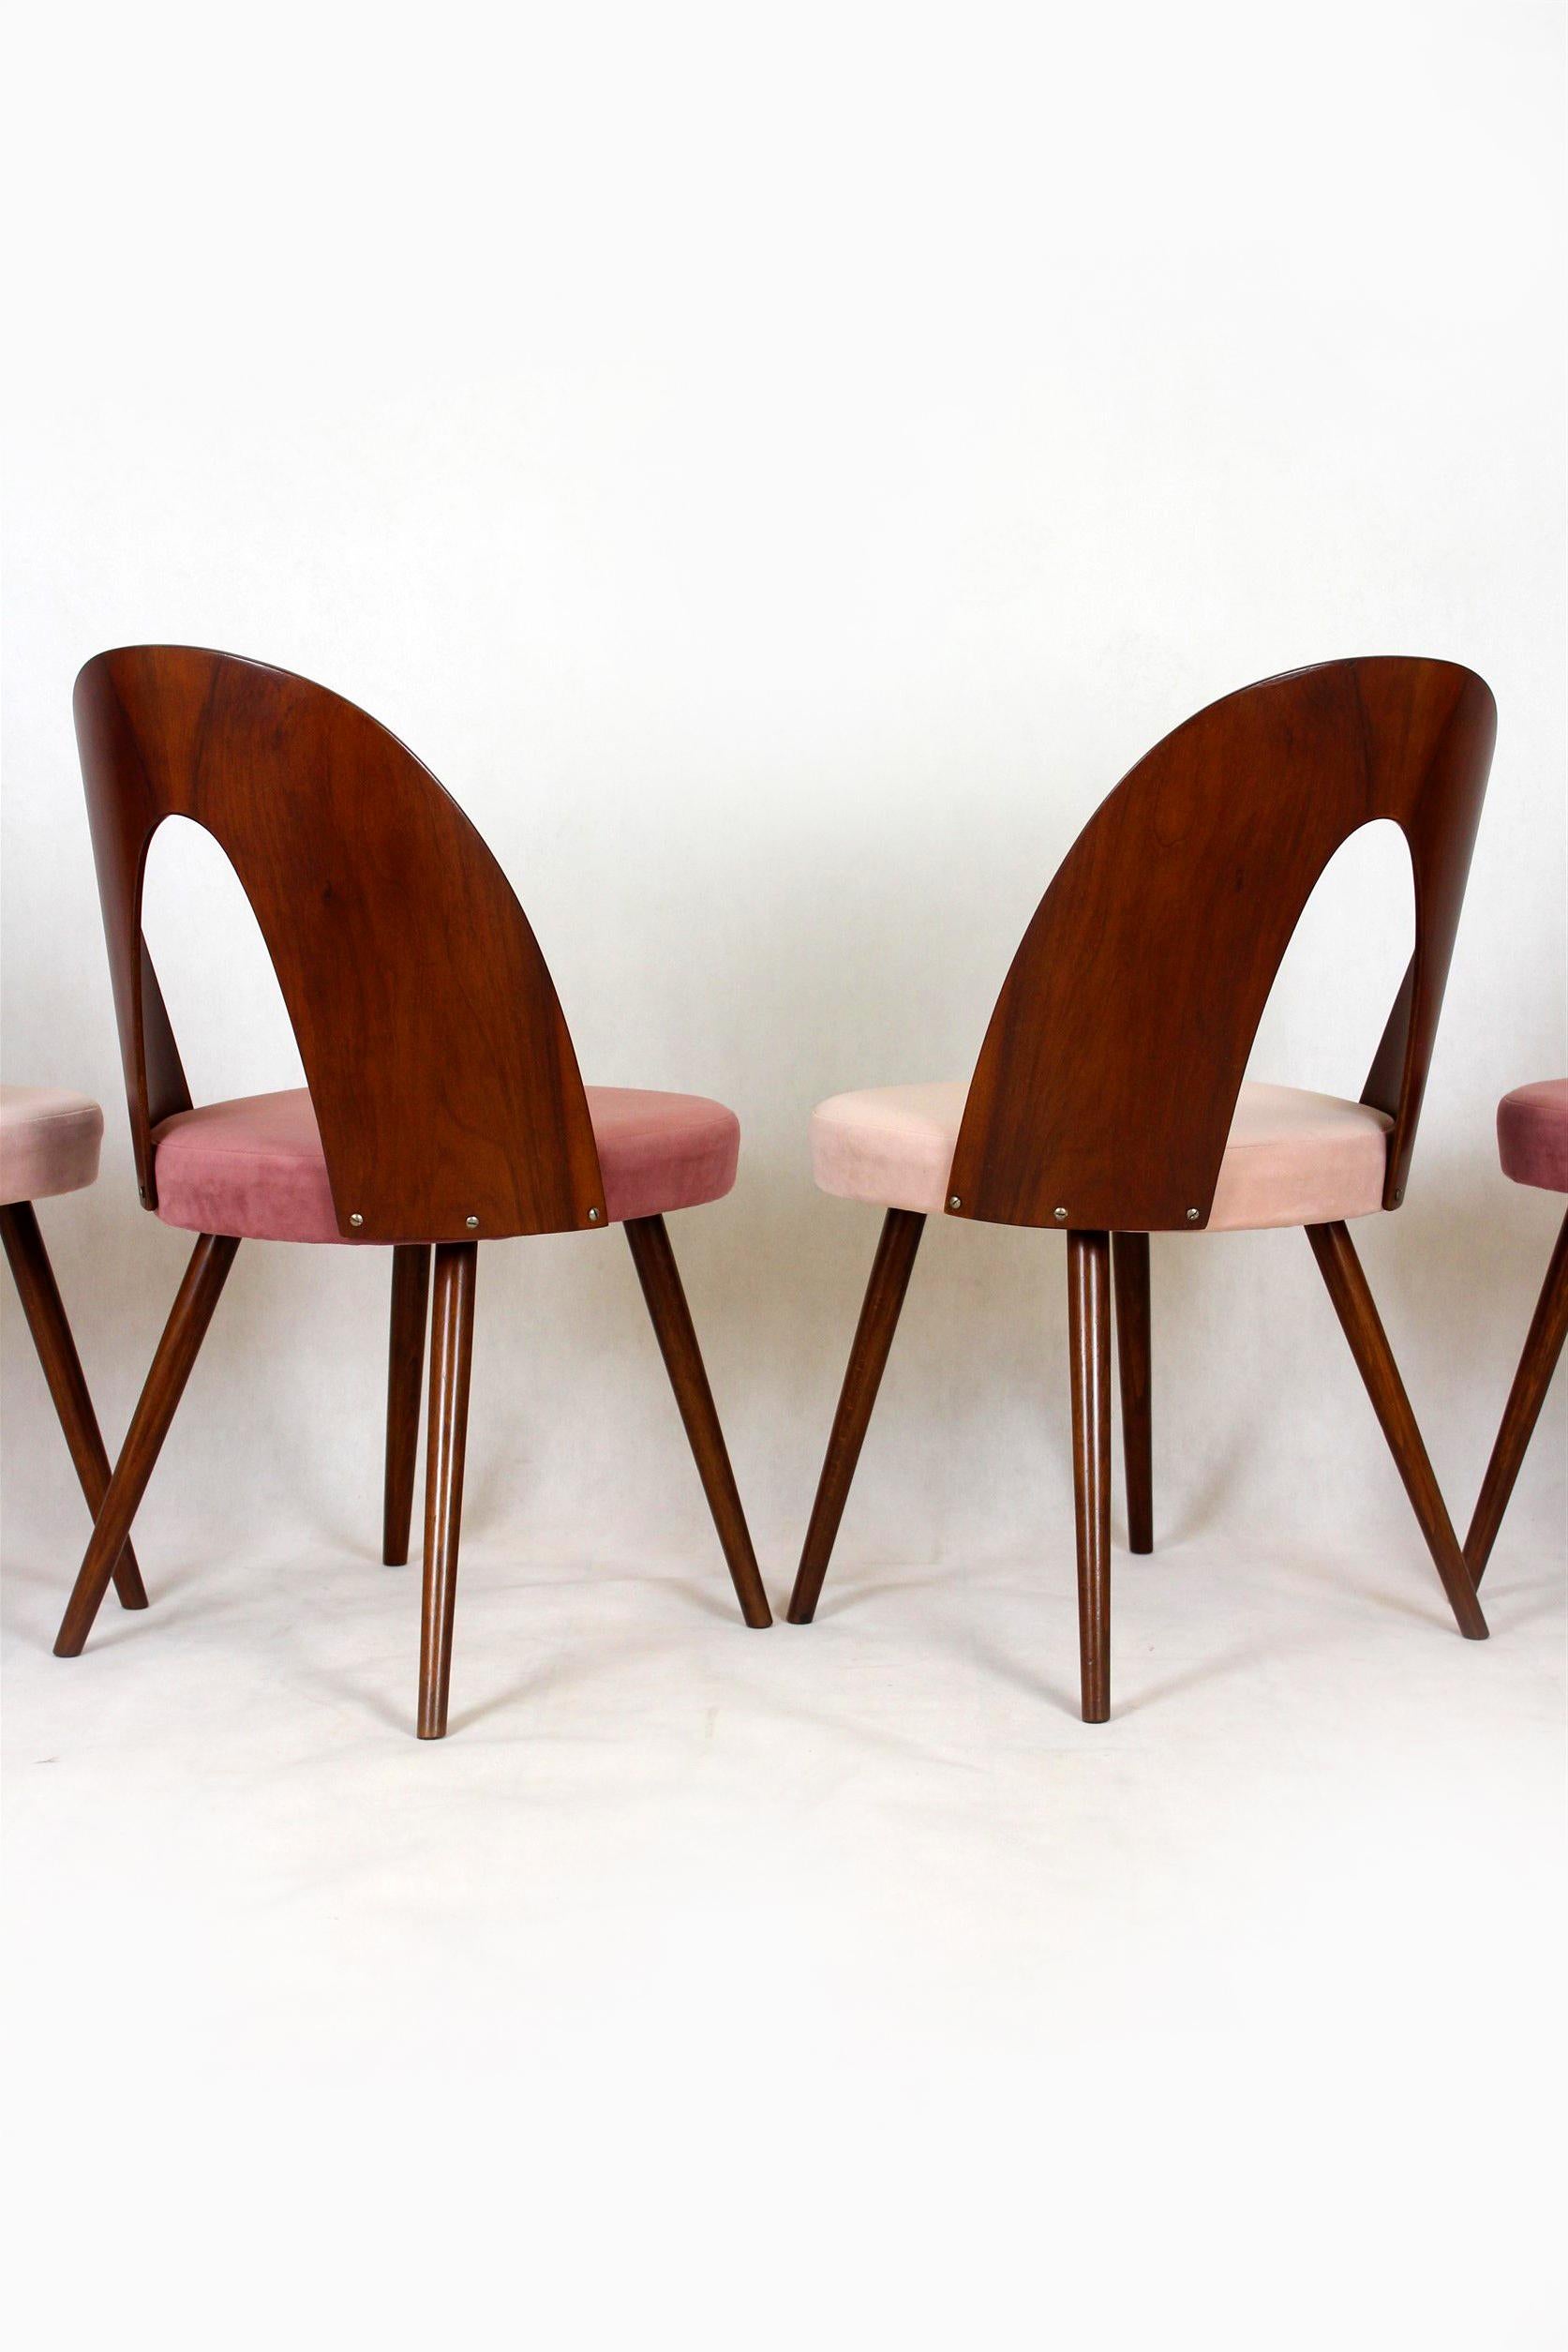 Fabric Reupholstered Dining Chairs by Antonin Suman, 1960s, Set of 4